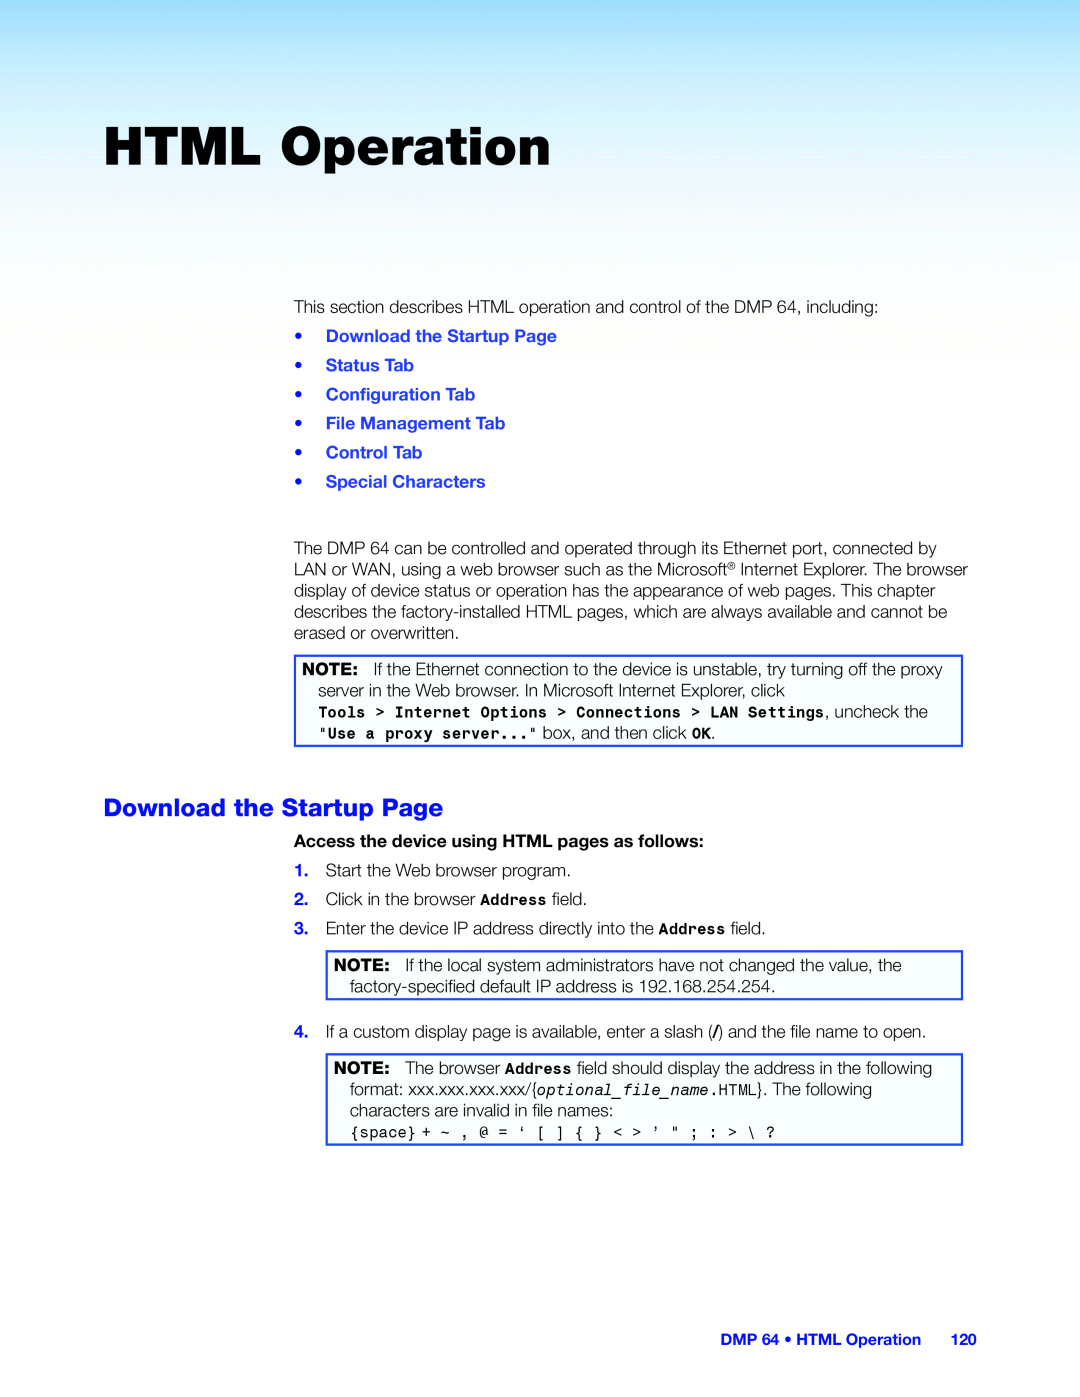 Extron electronic DMP 64 HTML Operation, •Download the Startup Page •Status Tab, •Control Tab •Special Characters 